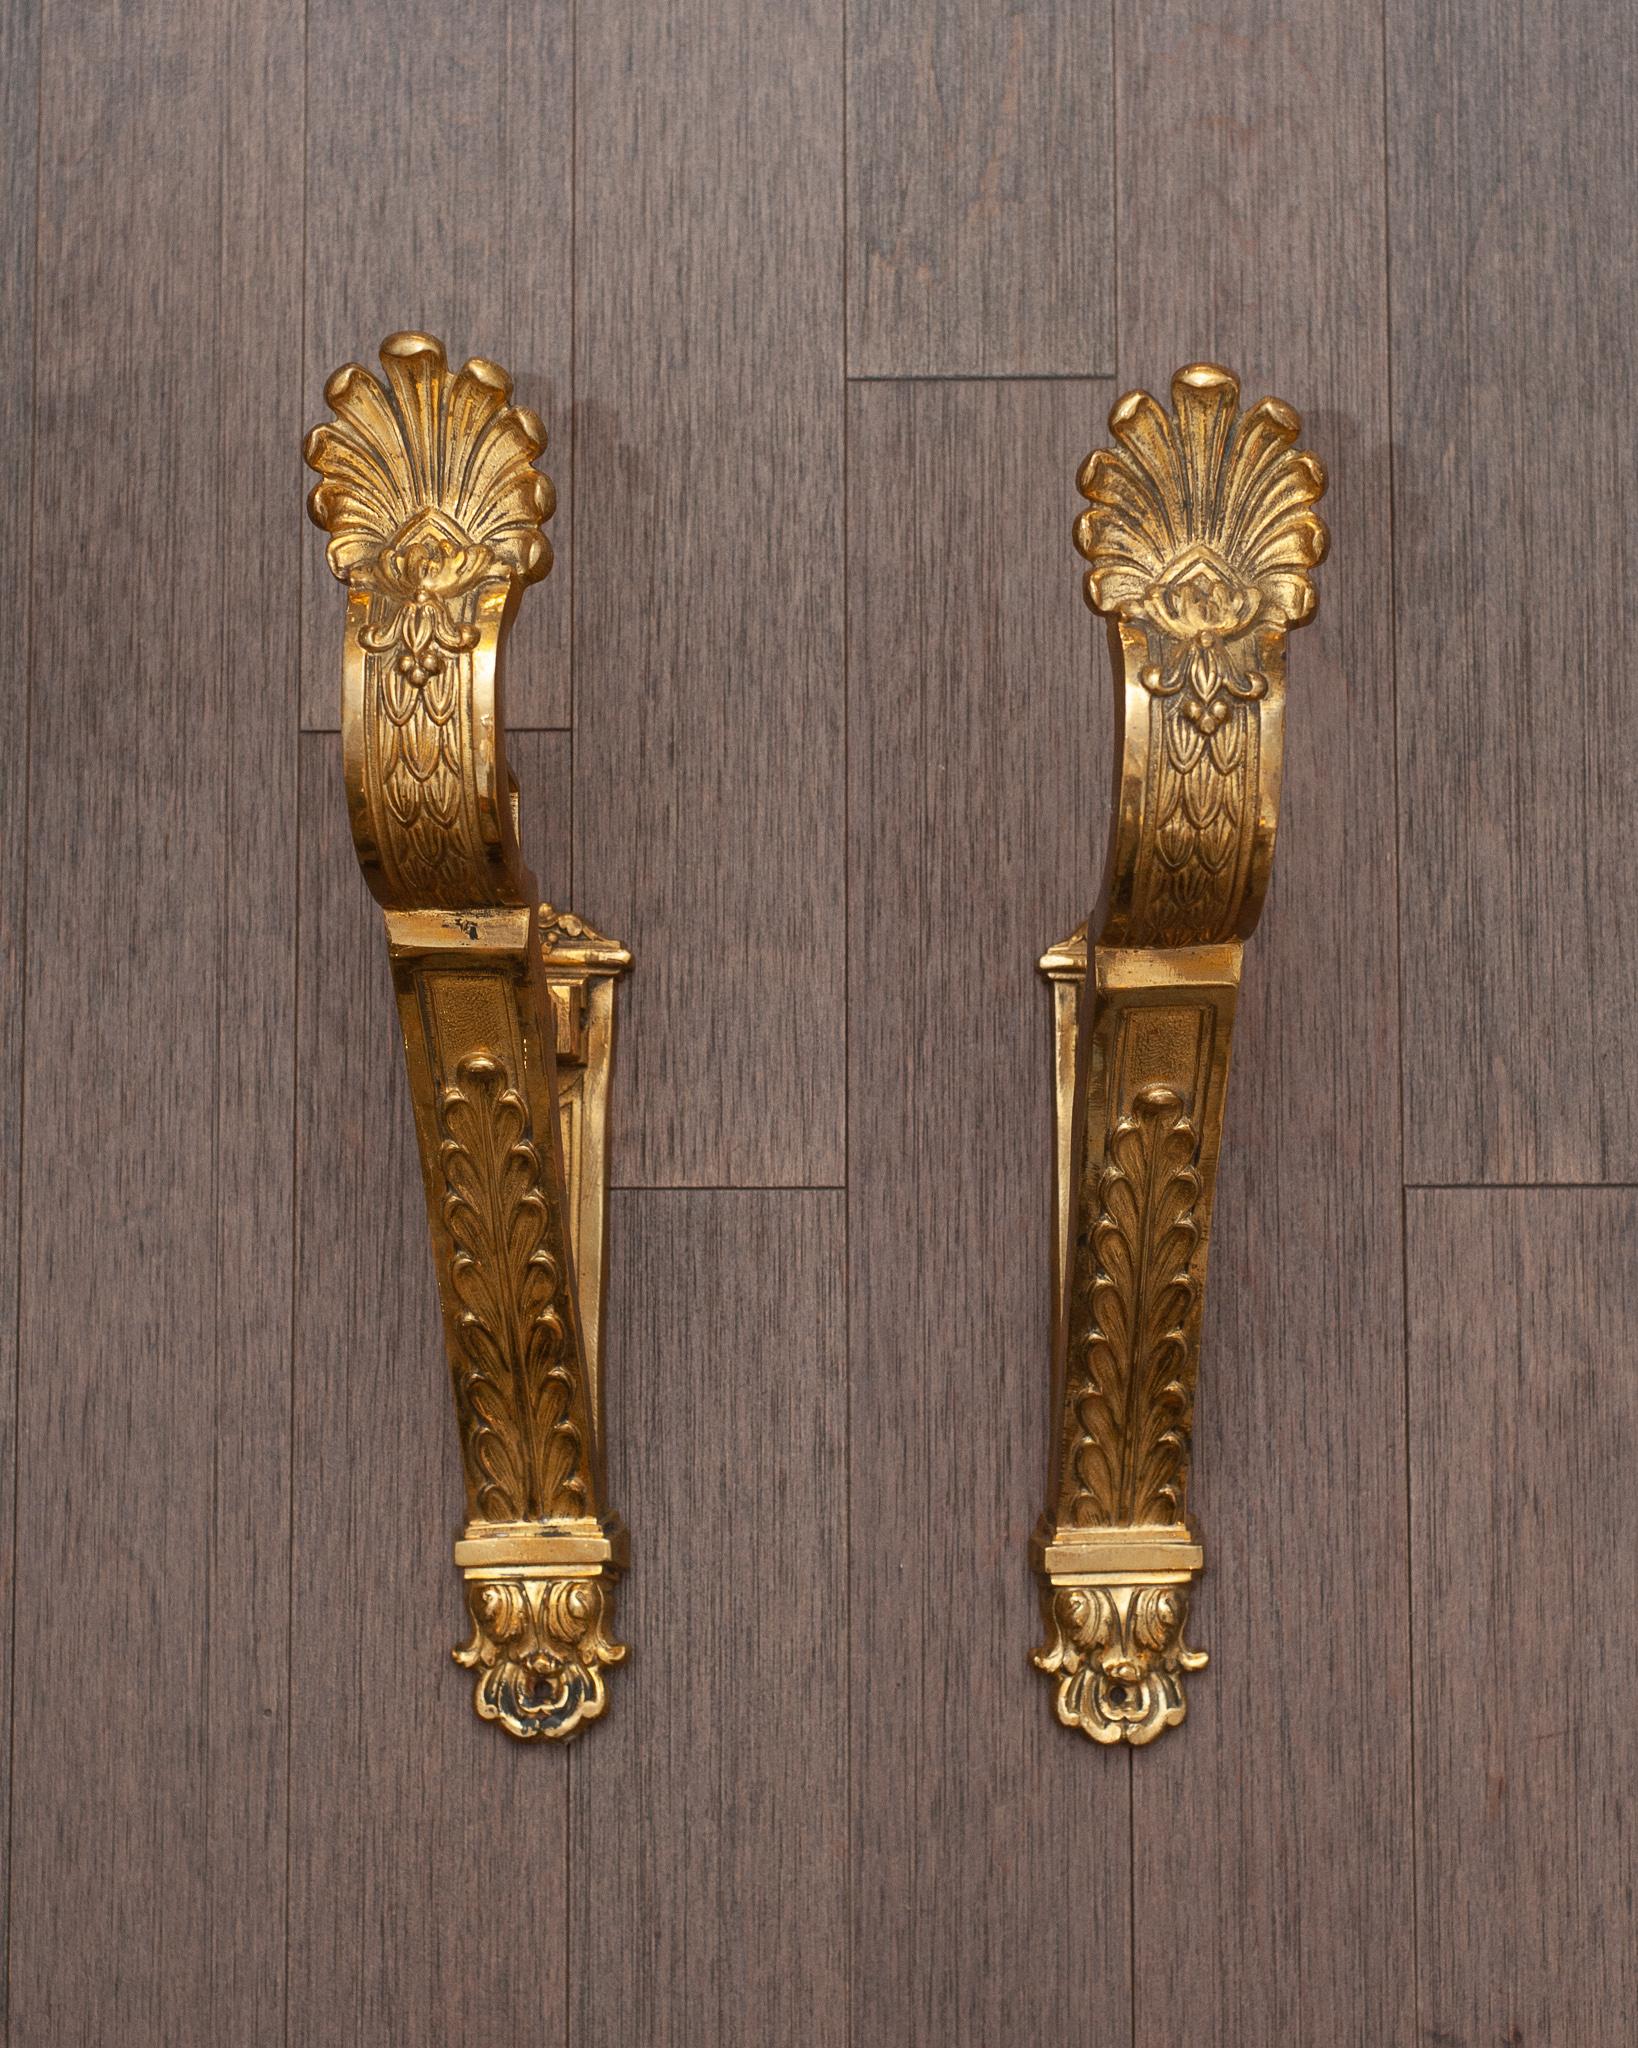 An antique French pair of sculpted gilt bronze curtain hooks or tie-backs richly decorated with foliage and shell motifs.